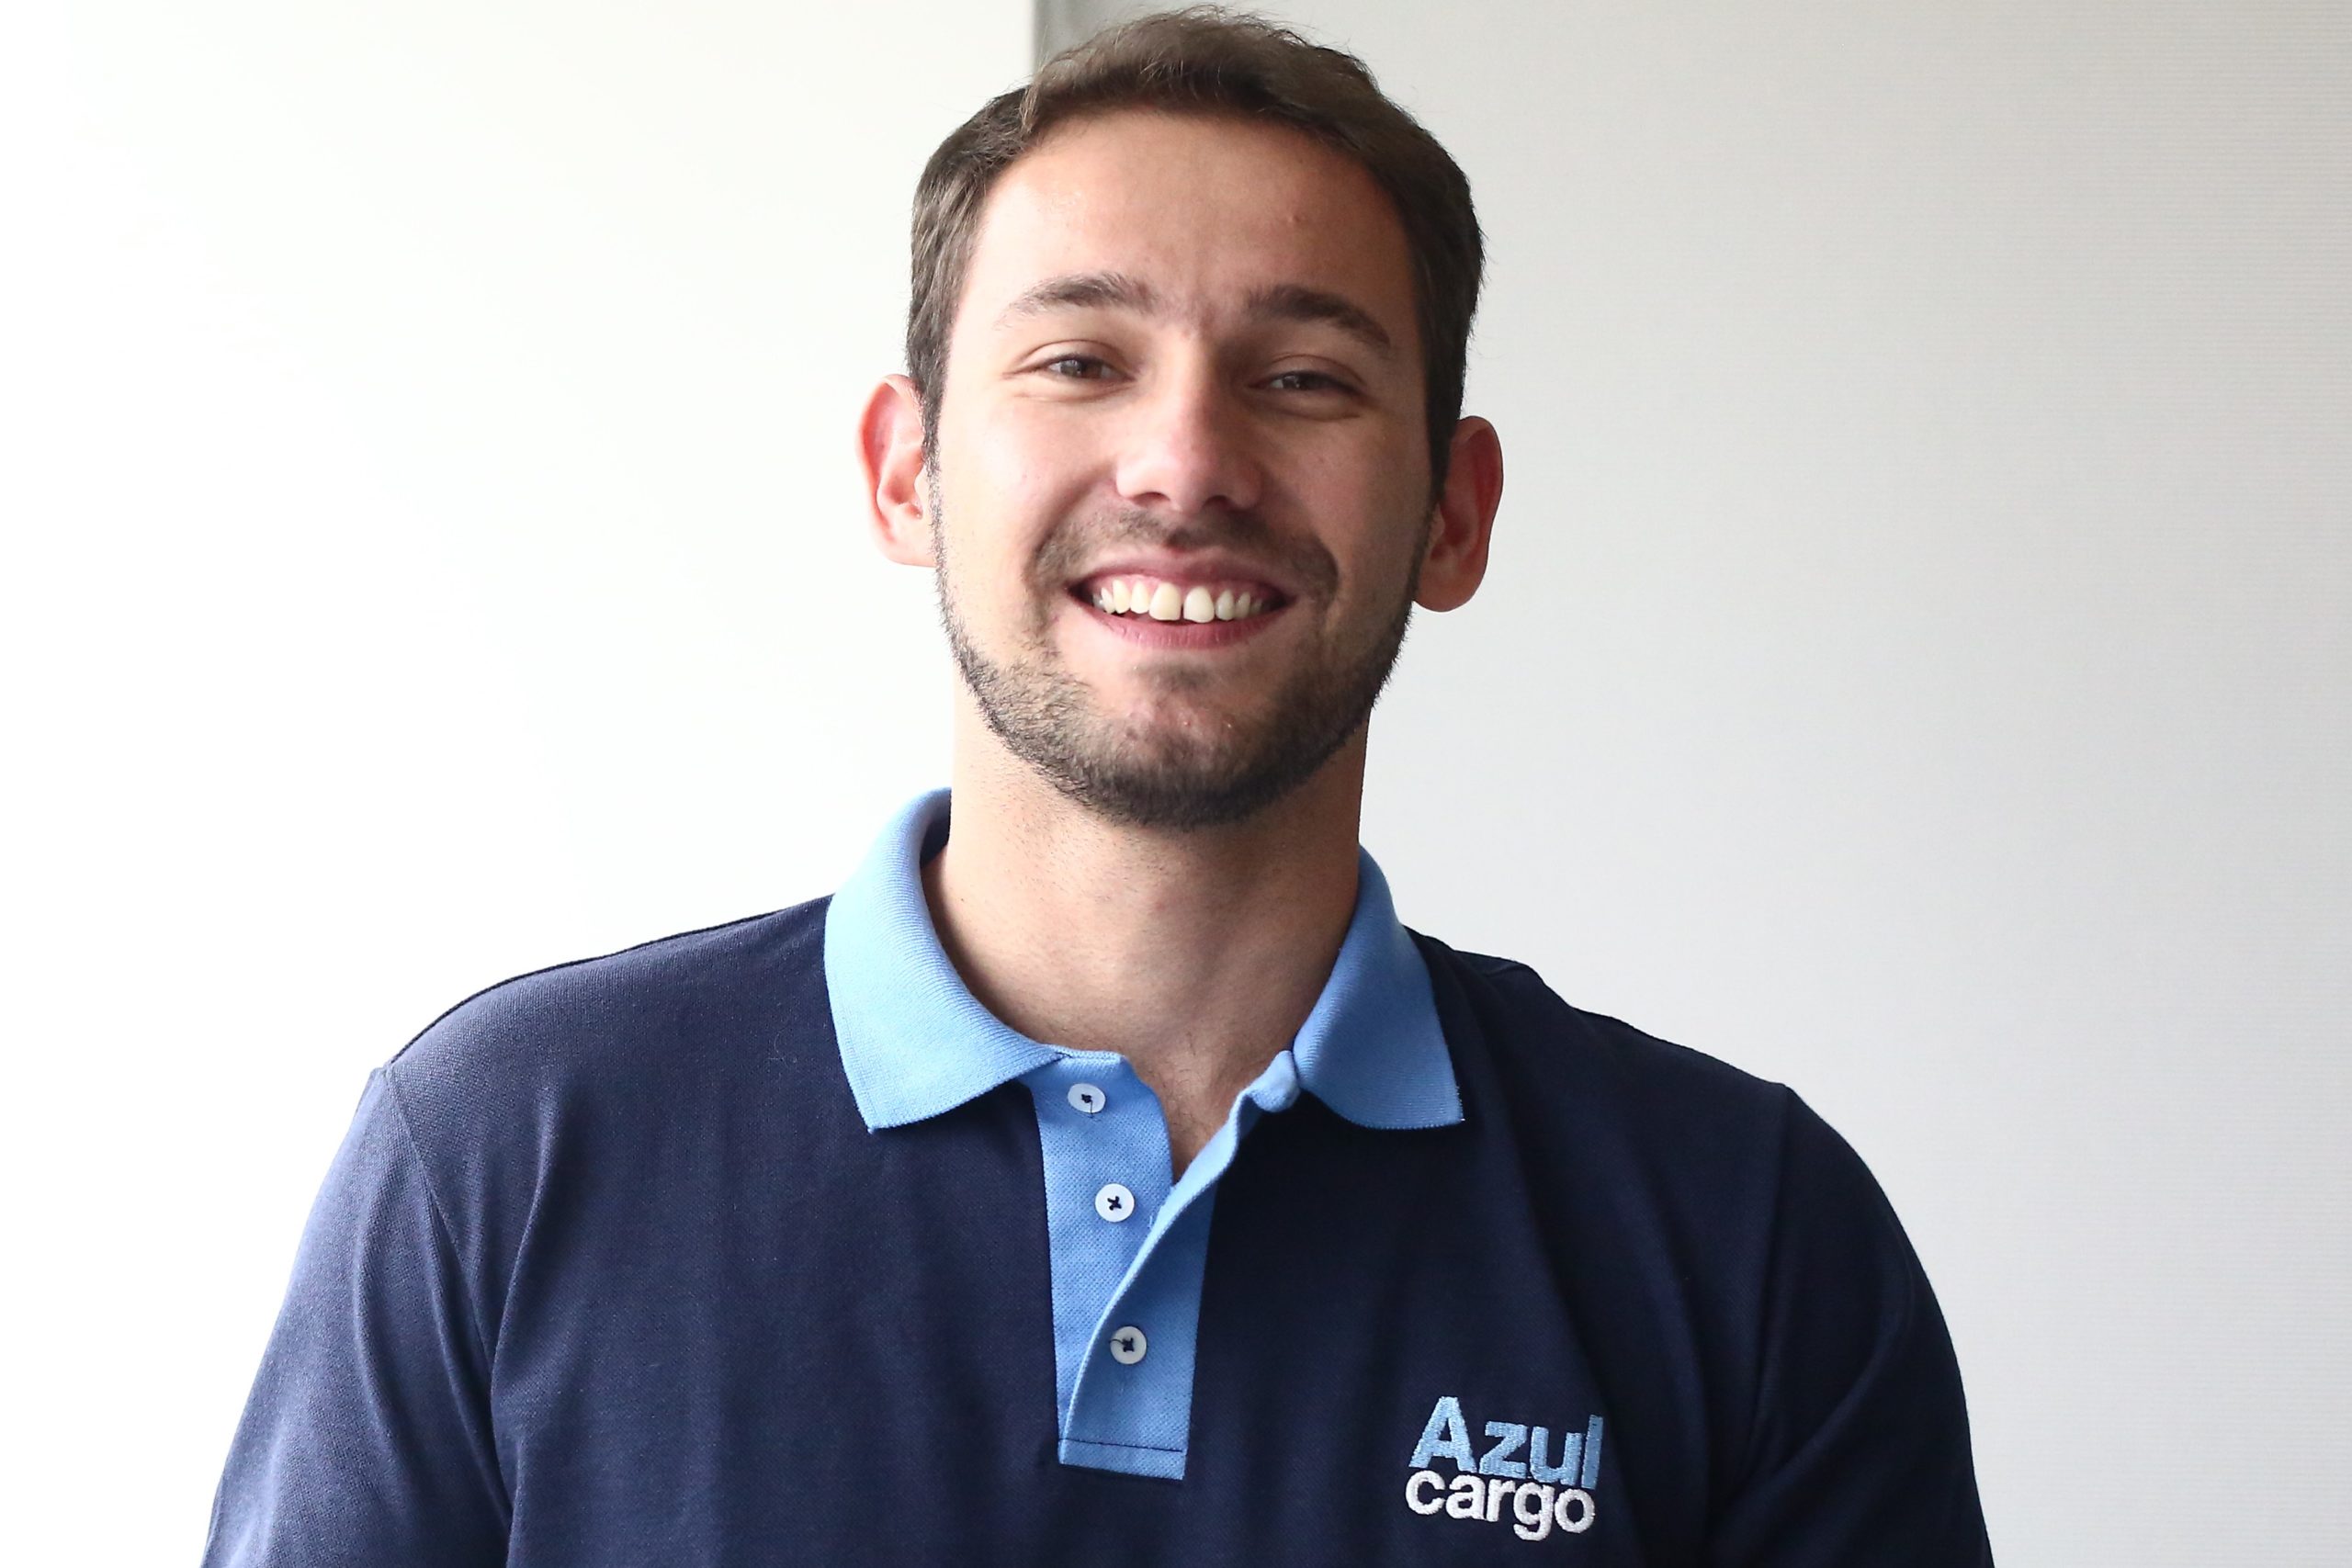 Azul’s cargo planning manager, Enio Rabelo Frota